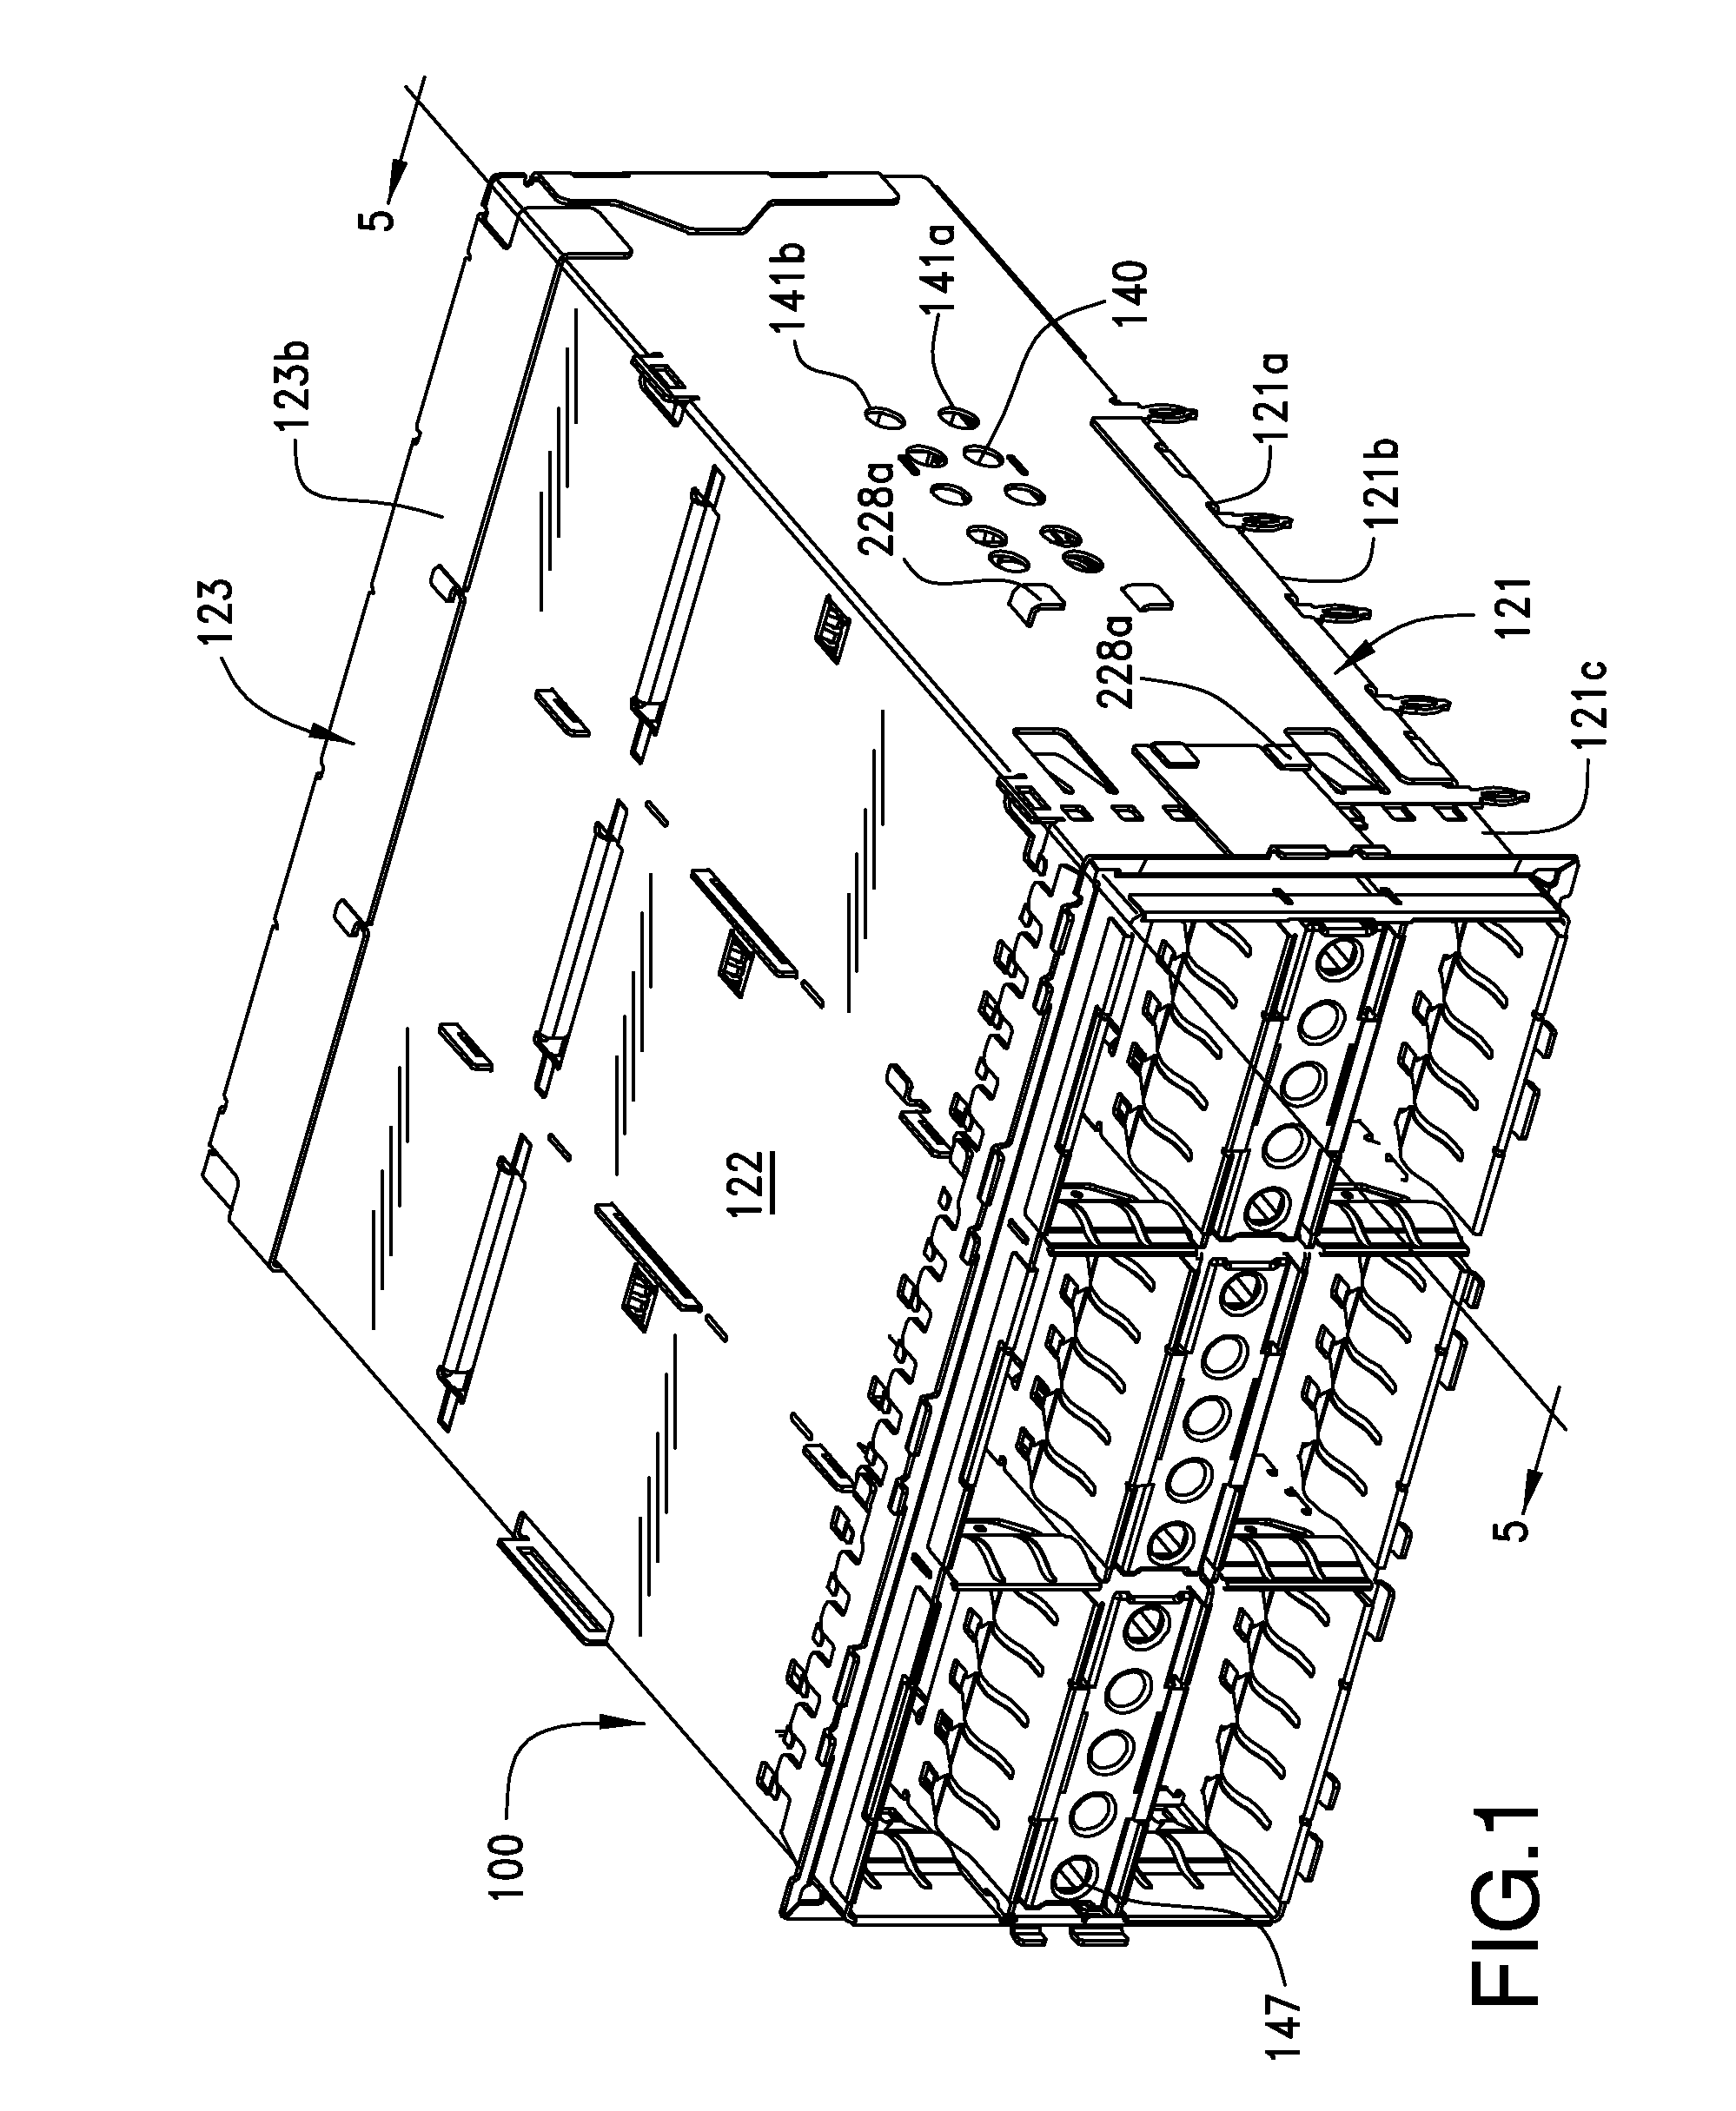 Connector assembly with improved cooling capability